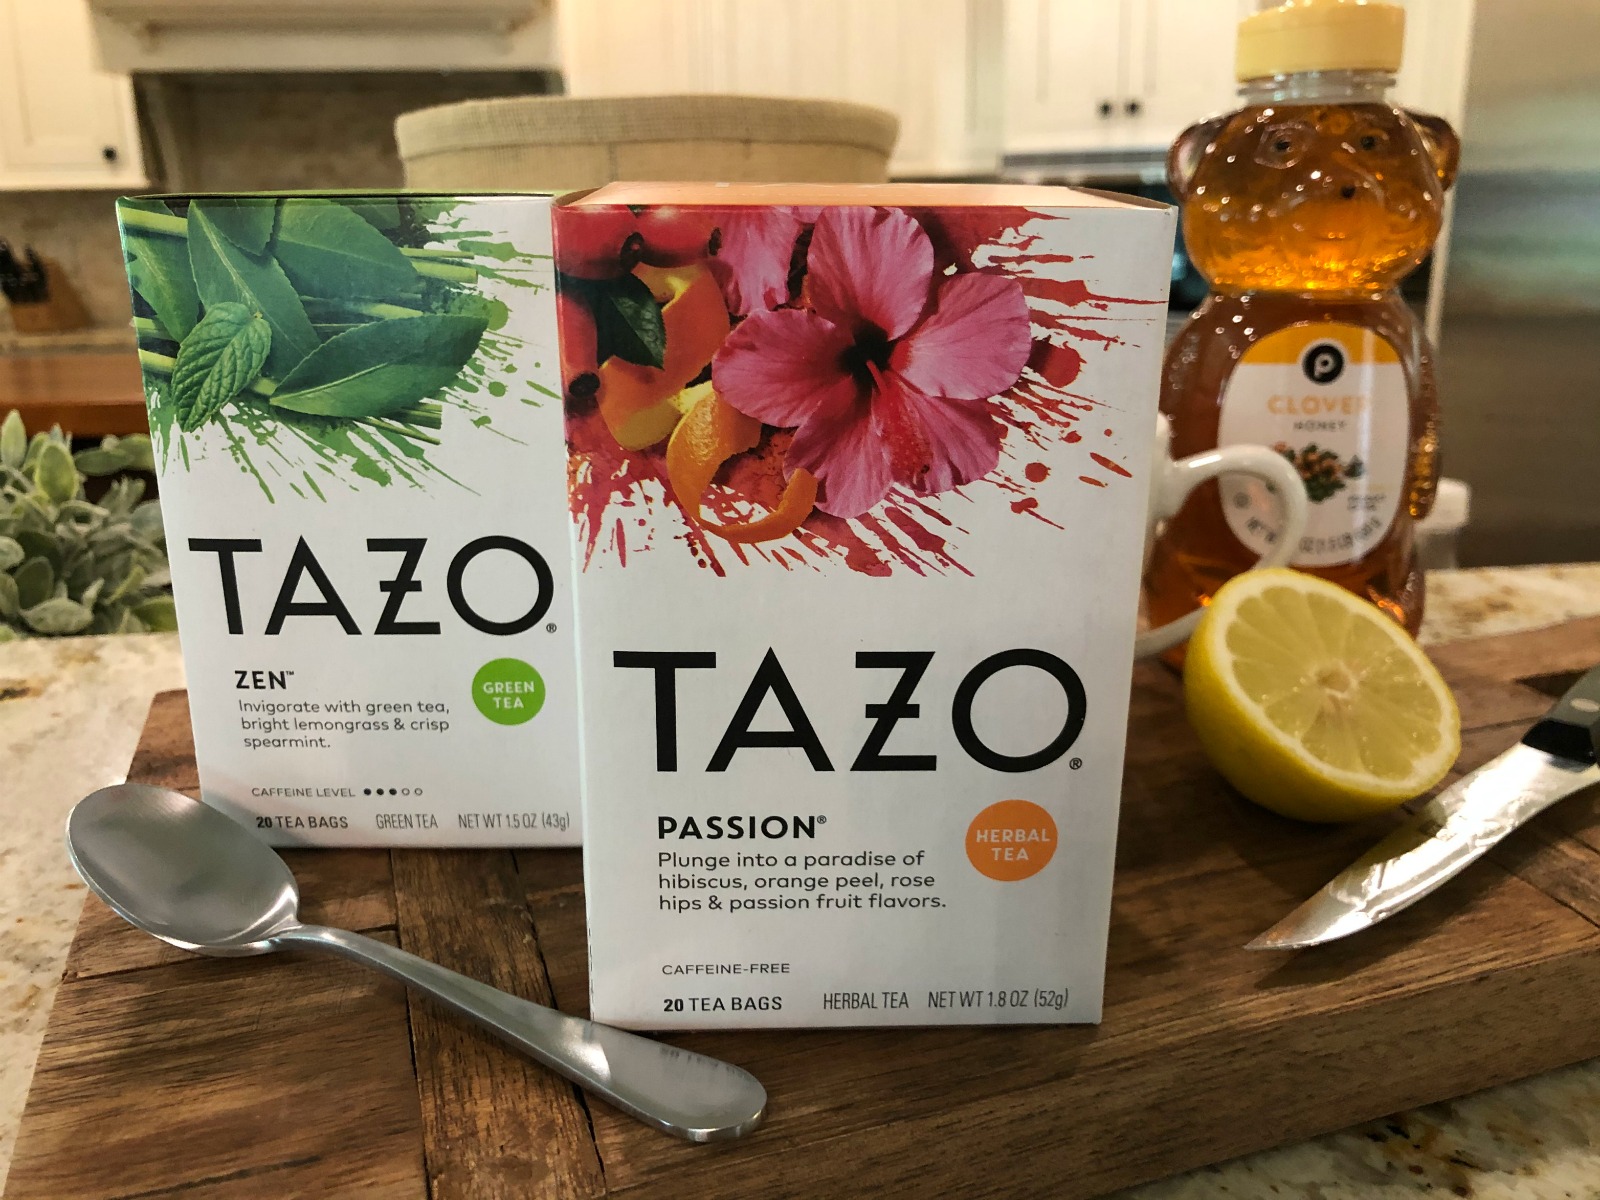 Still Time To Grab Your Favorite TAZO Teas And Save At Publix on I Heart Publix 1